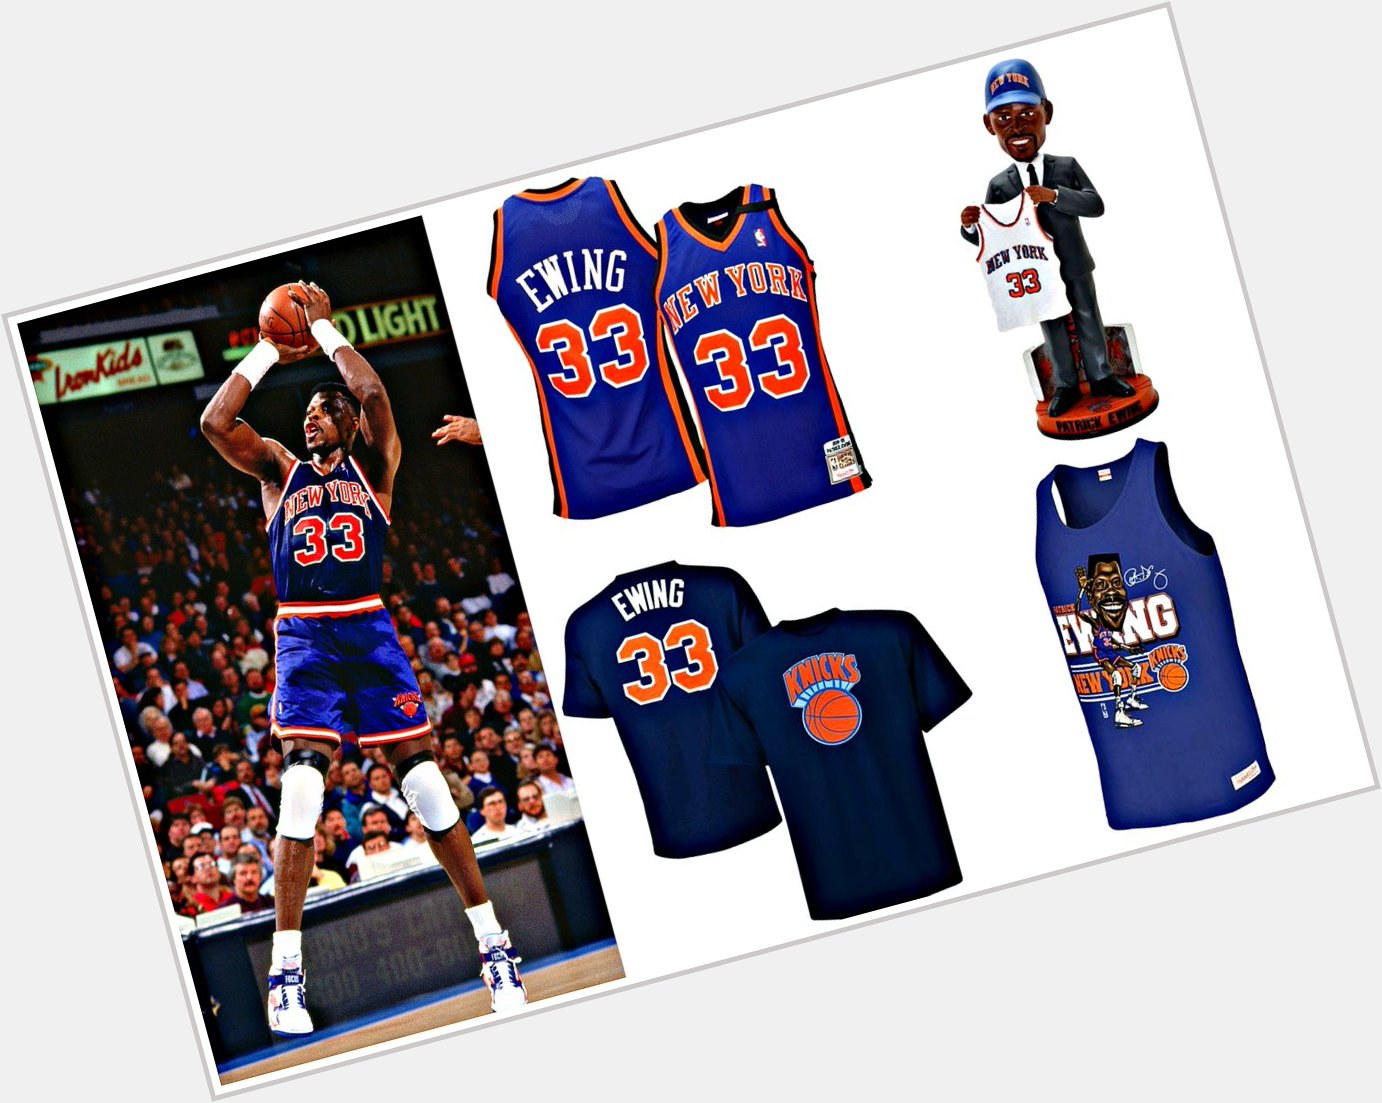 NBASTORE: Join us in wishing NBA Hall-of-Fame inductee Patrick Ewing a happy birthday!
Celebrate today 